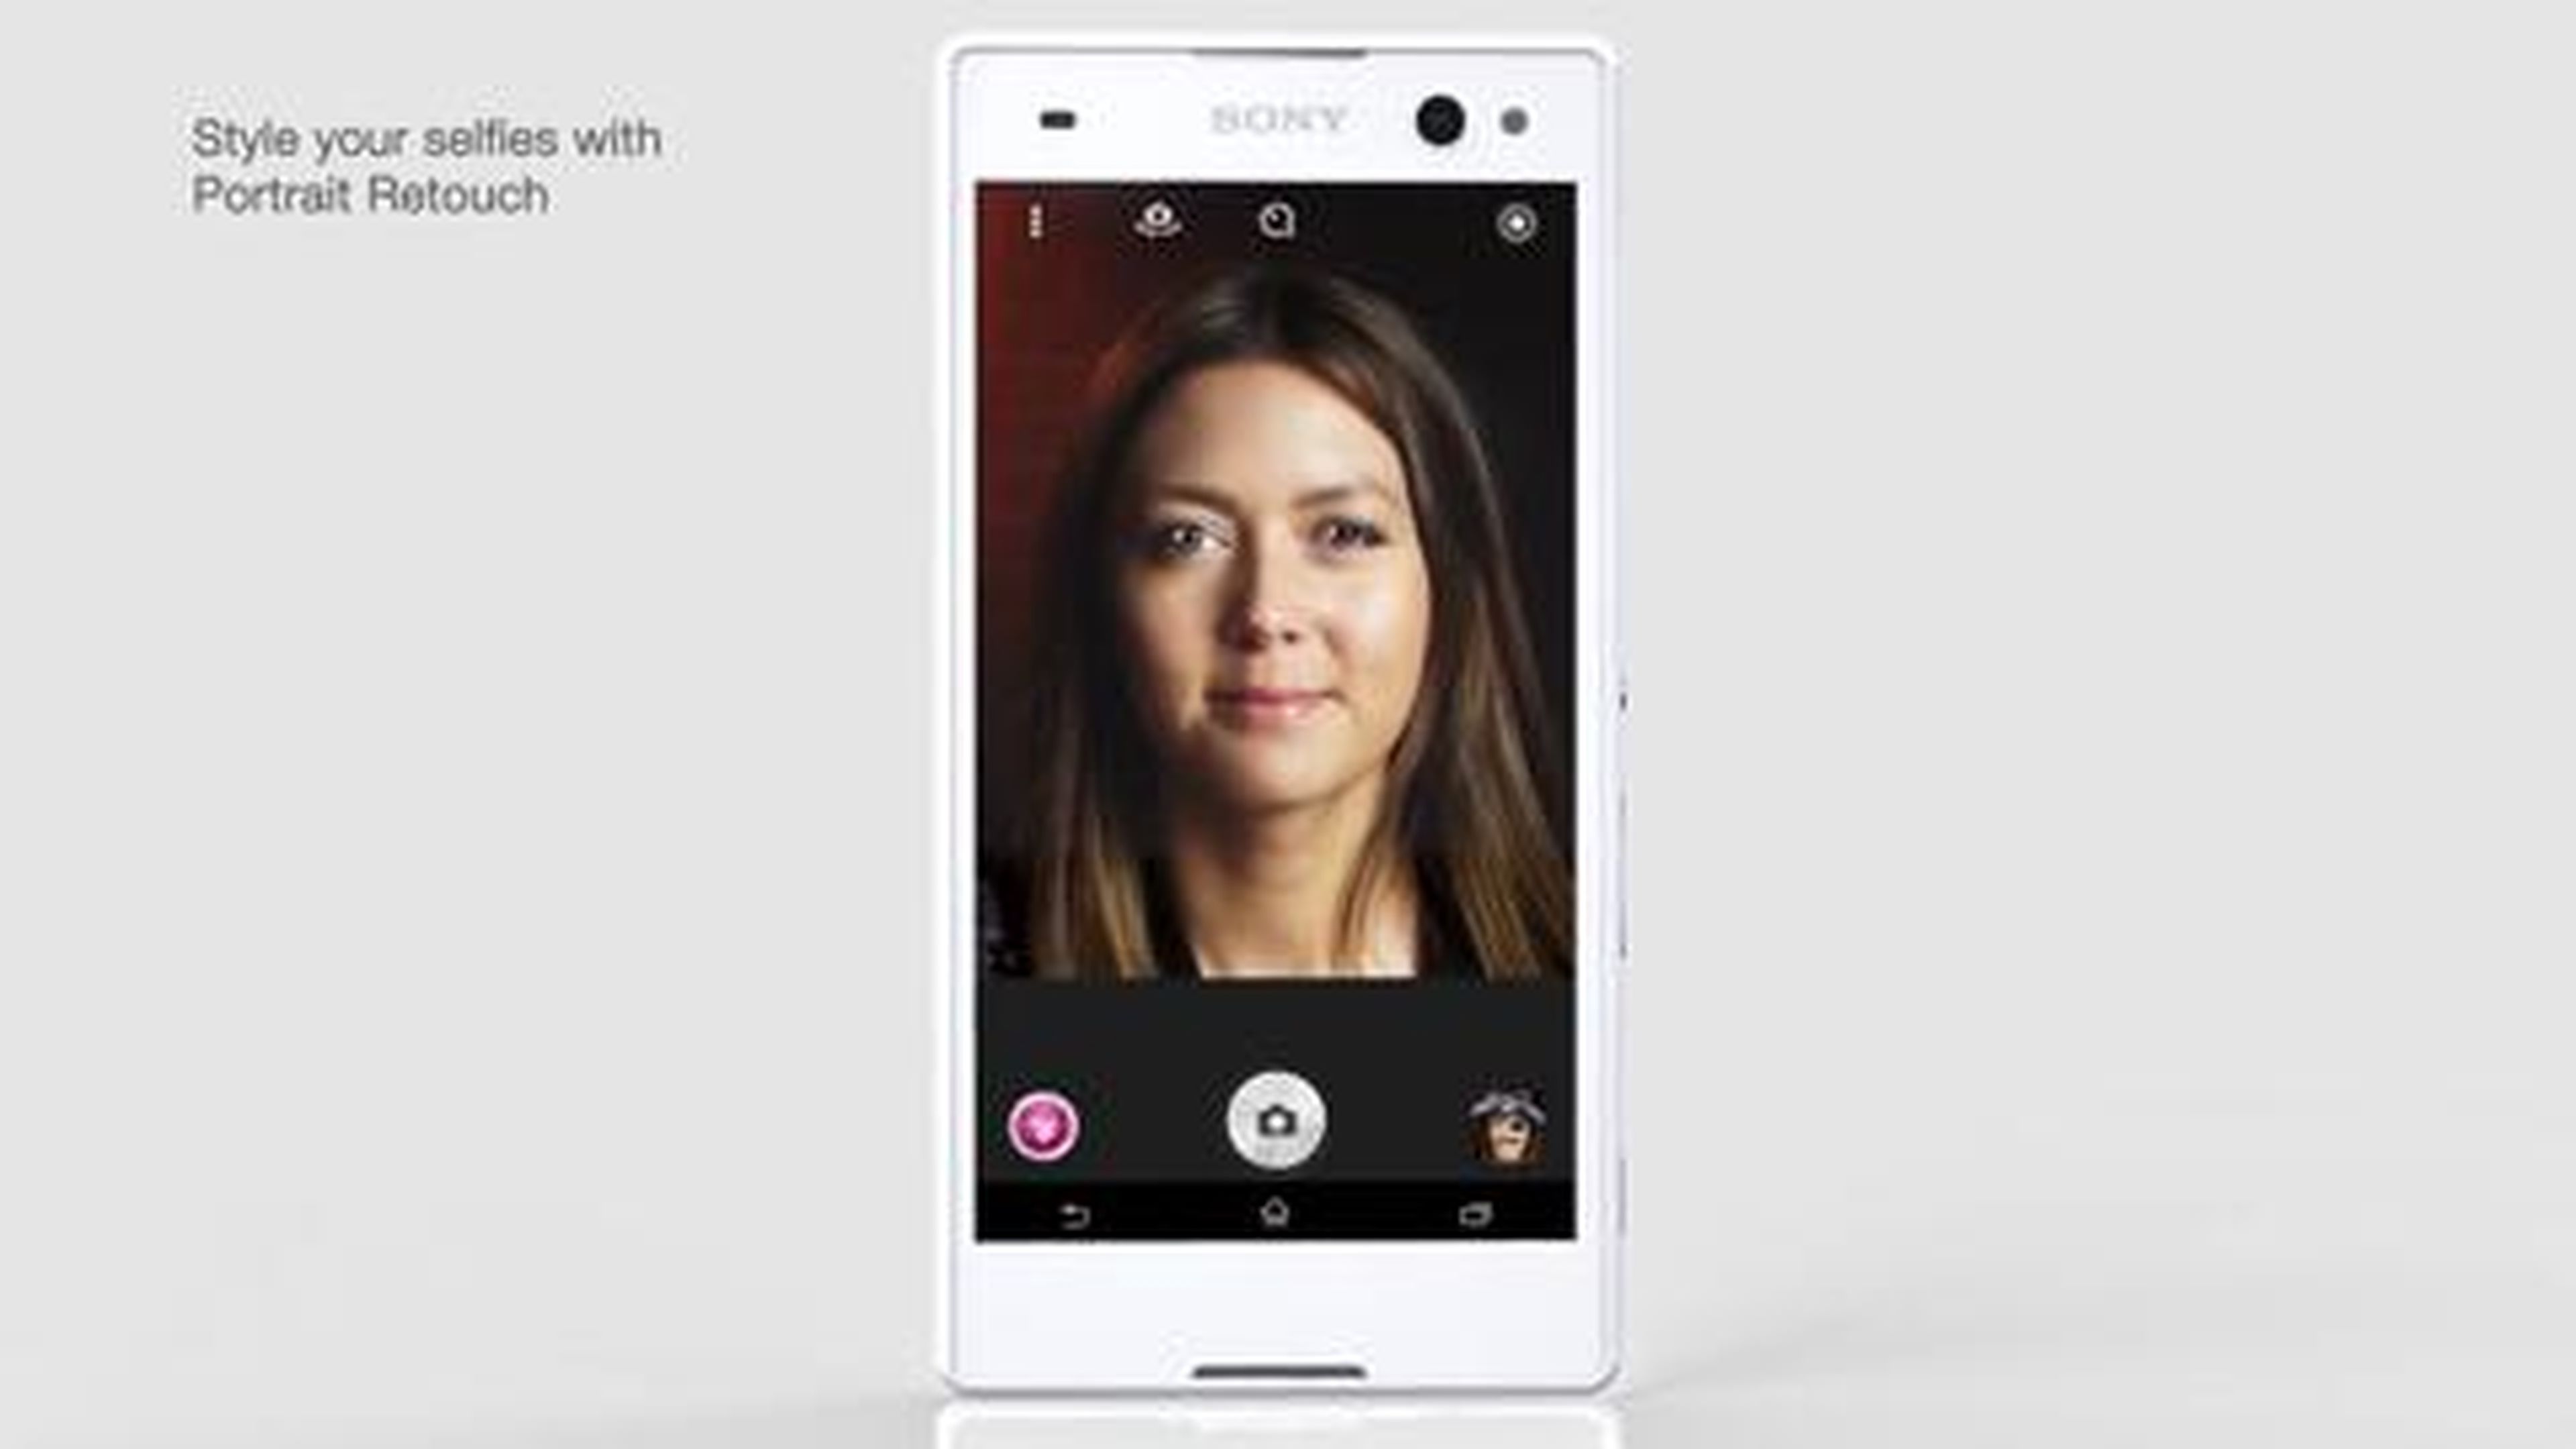 Introducing Xperia C3, the selfie Android smartphone from Sony